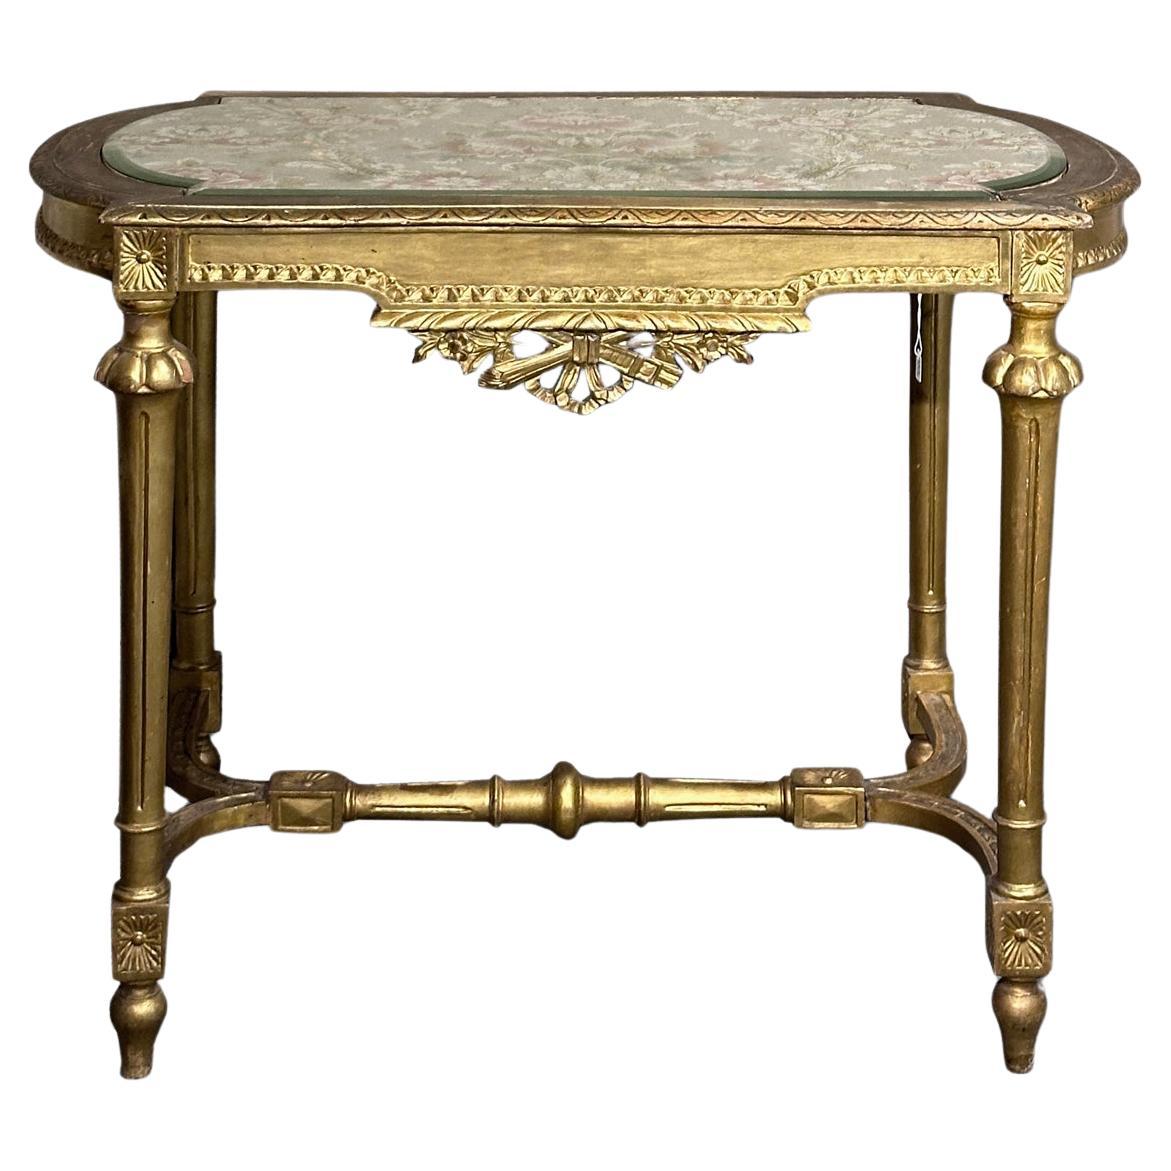 END OF THE 19th CENTURY GOLDEN TABLE IN NEOCLASSIC STYLE  For Sale